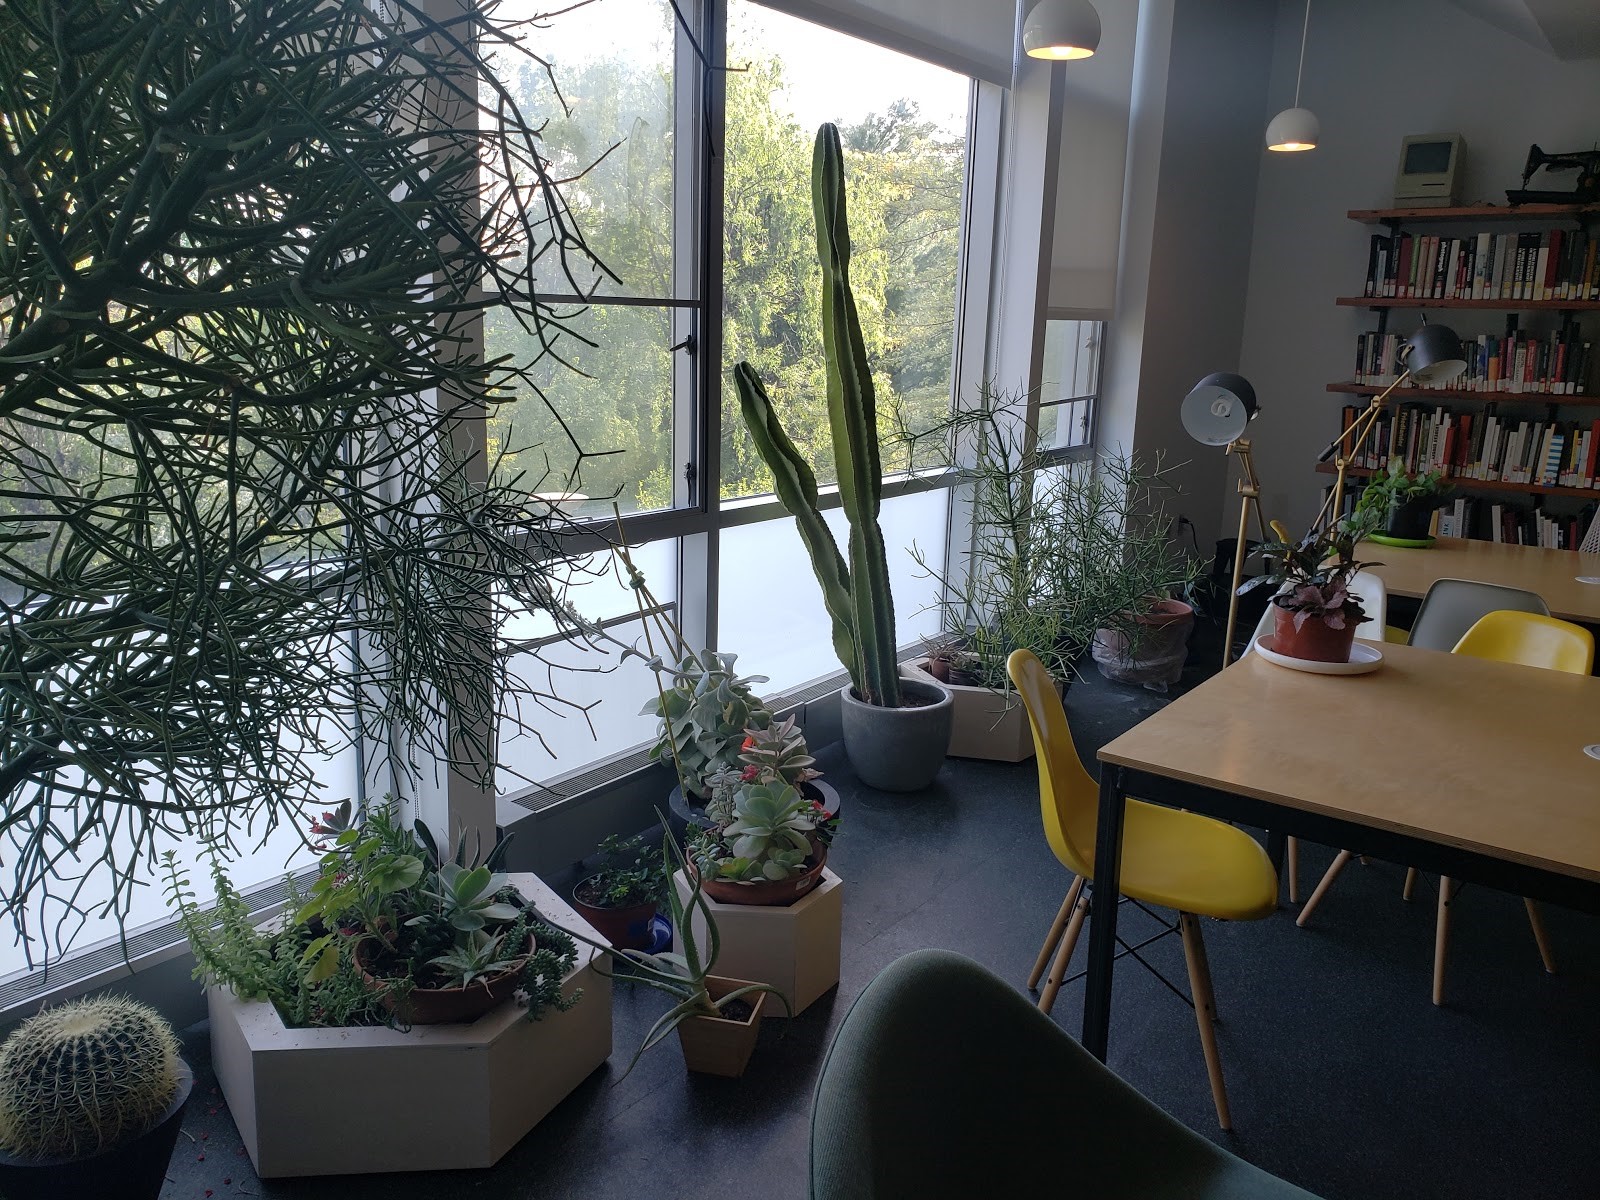 A table in the quiet reading room next to plants.